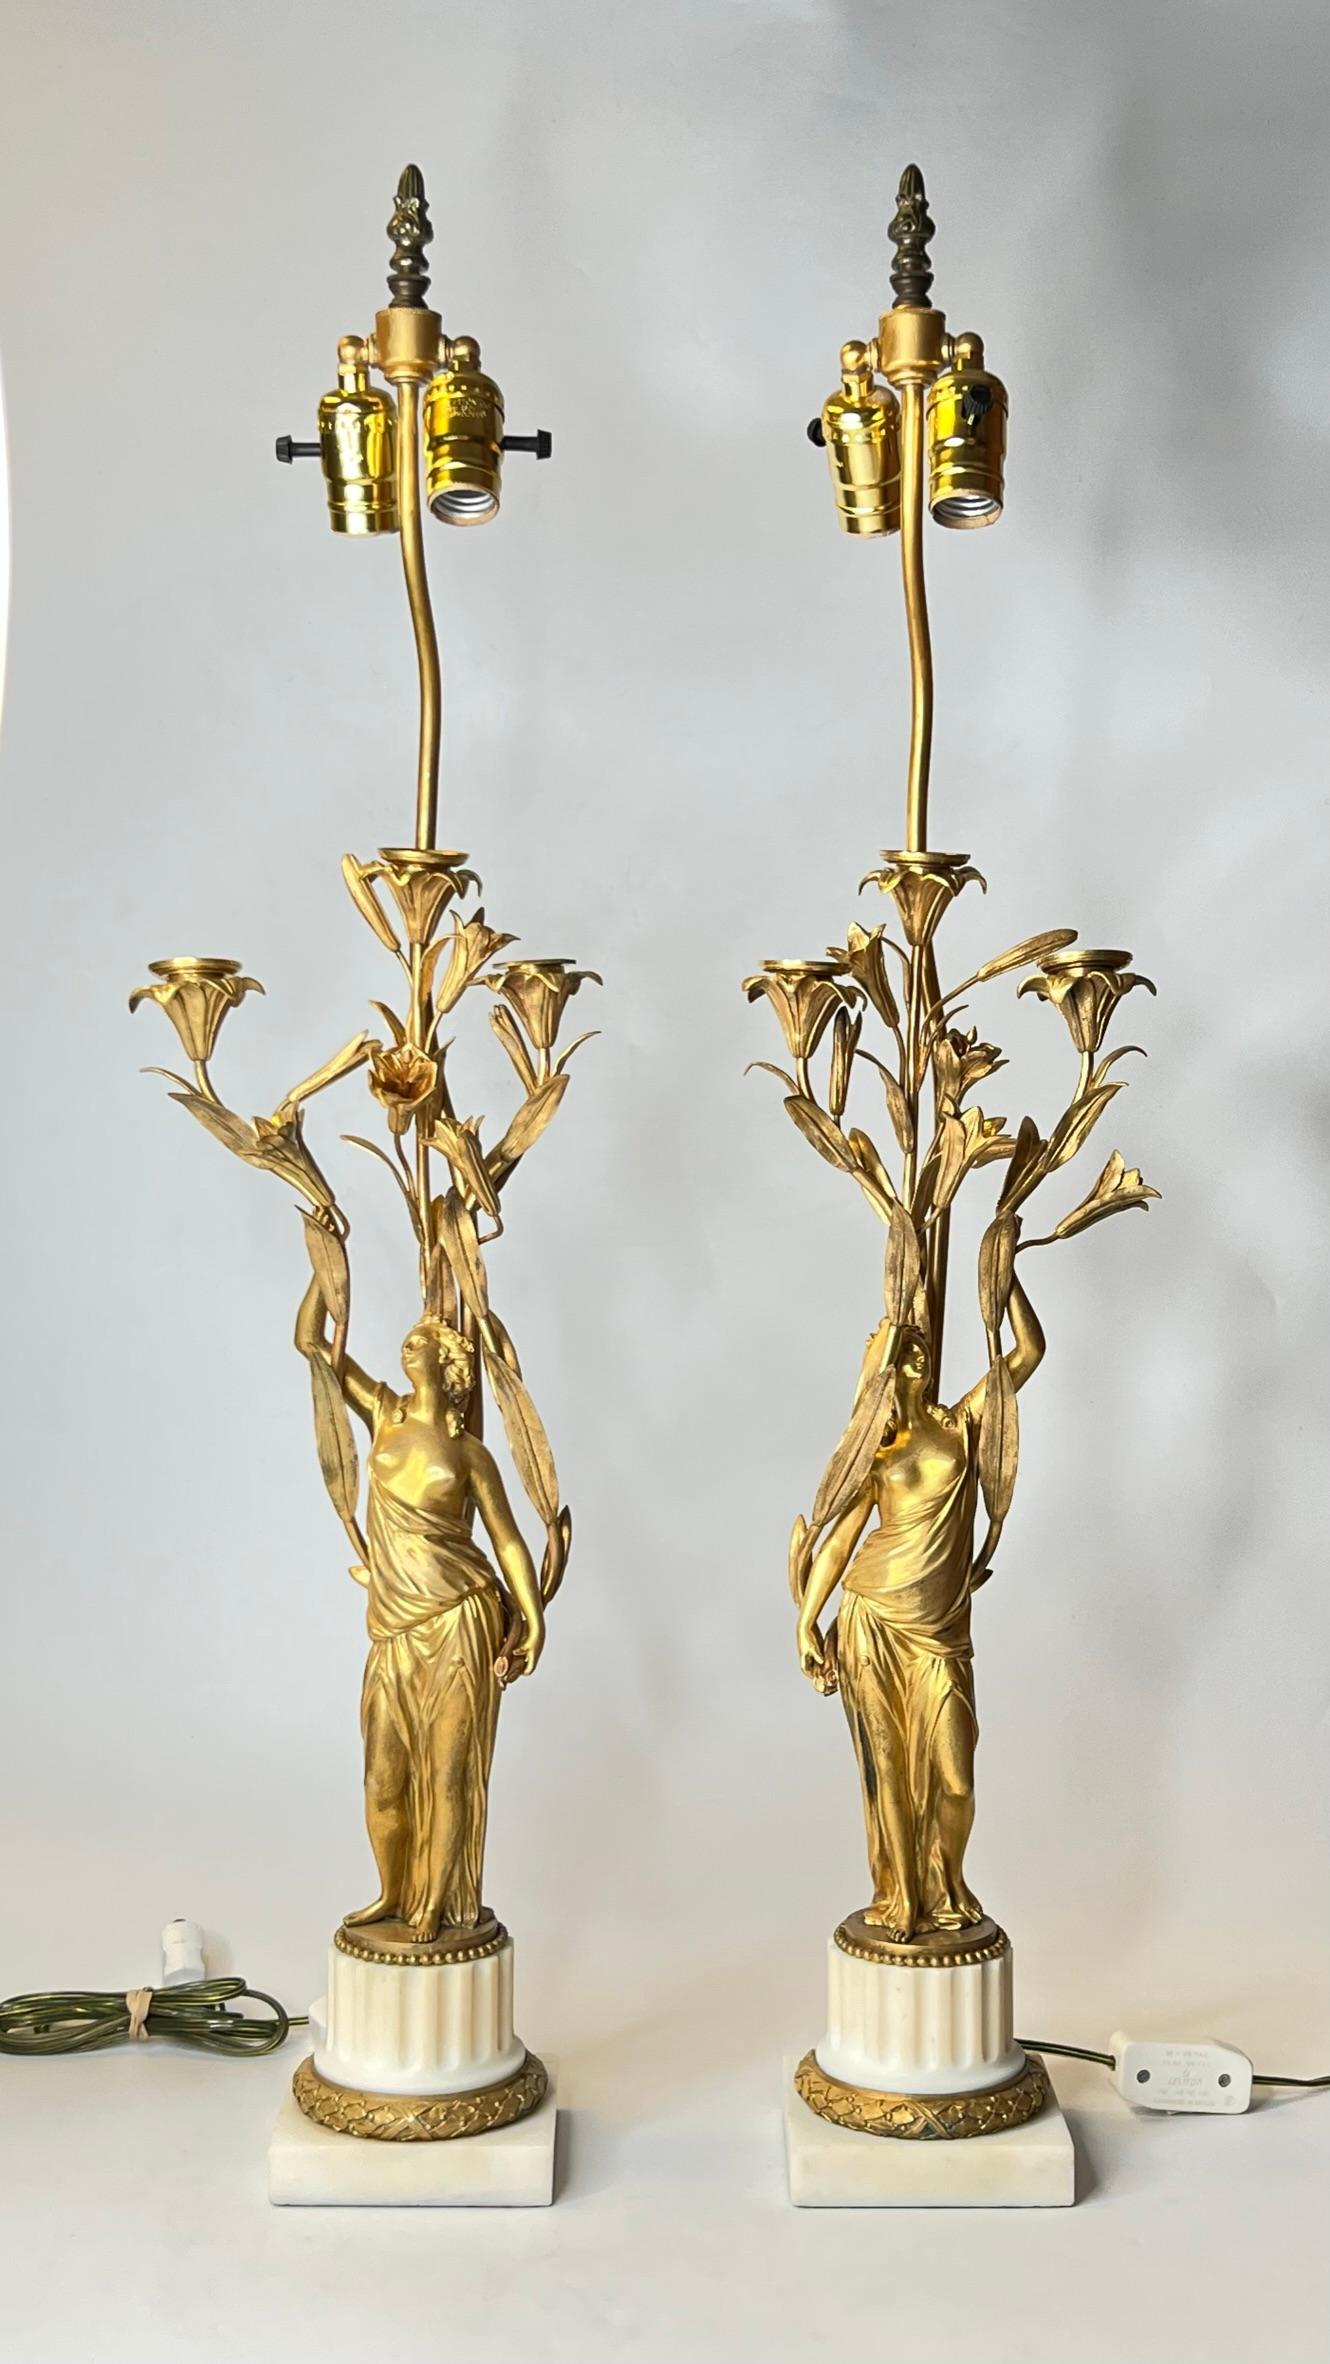 Our pair of nineteenth century gilt bronze and white marble candelabra feature the semi-nude figures of maidens in robes standing among bull rush, and three candle cups emanating from the reeds, with later brass hardware and sockets added. With